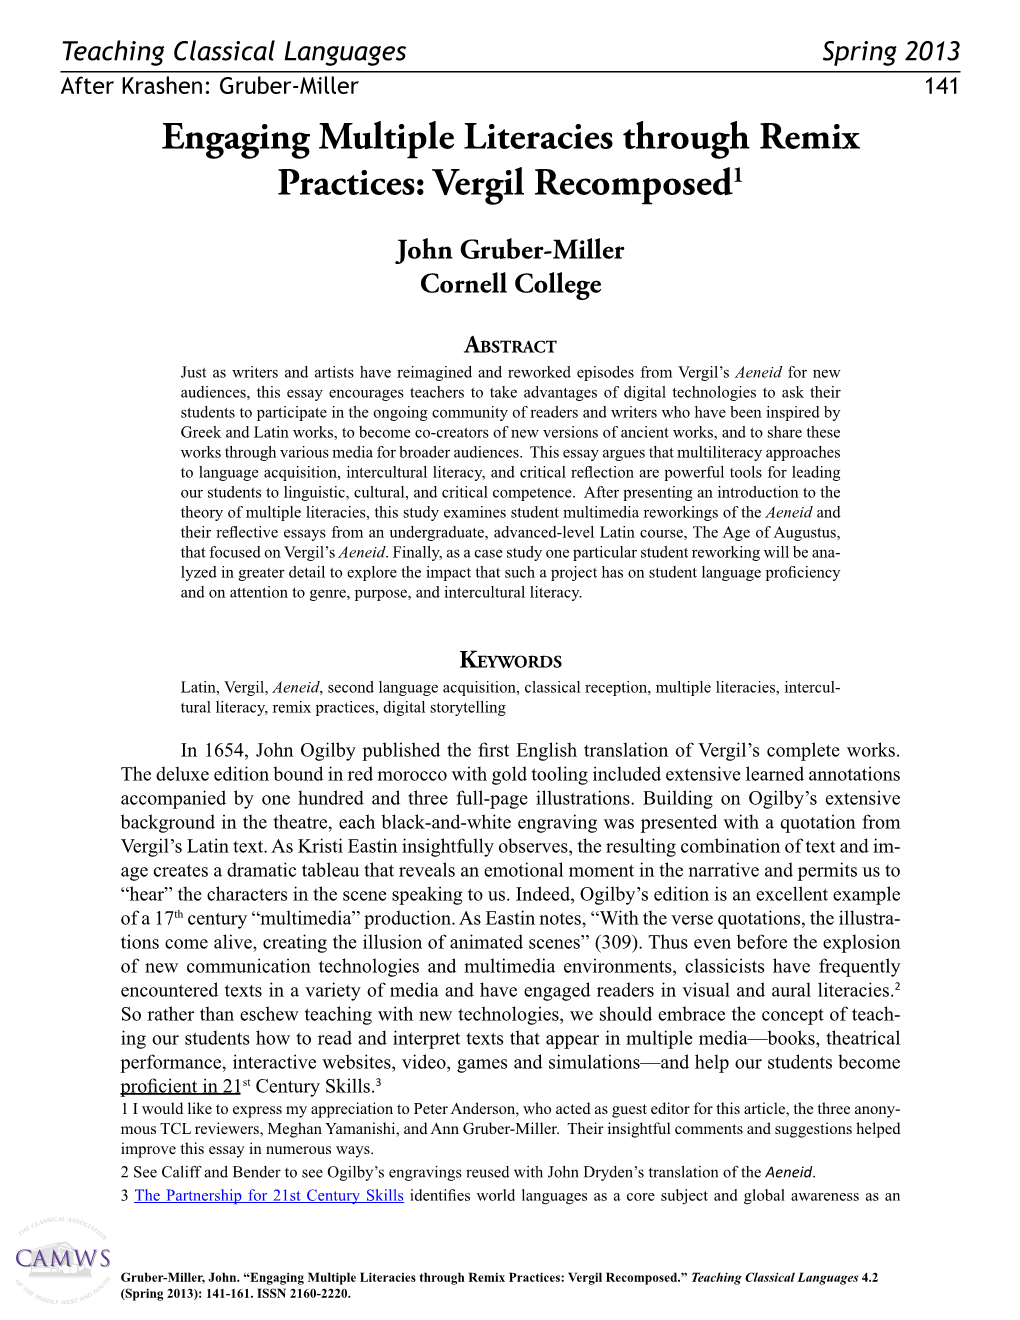 Engaging Multiple Literacies Through Remix Practices: Vergil Recomposed1